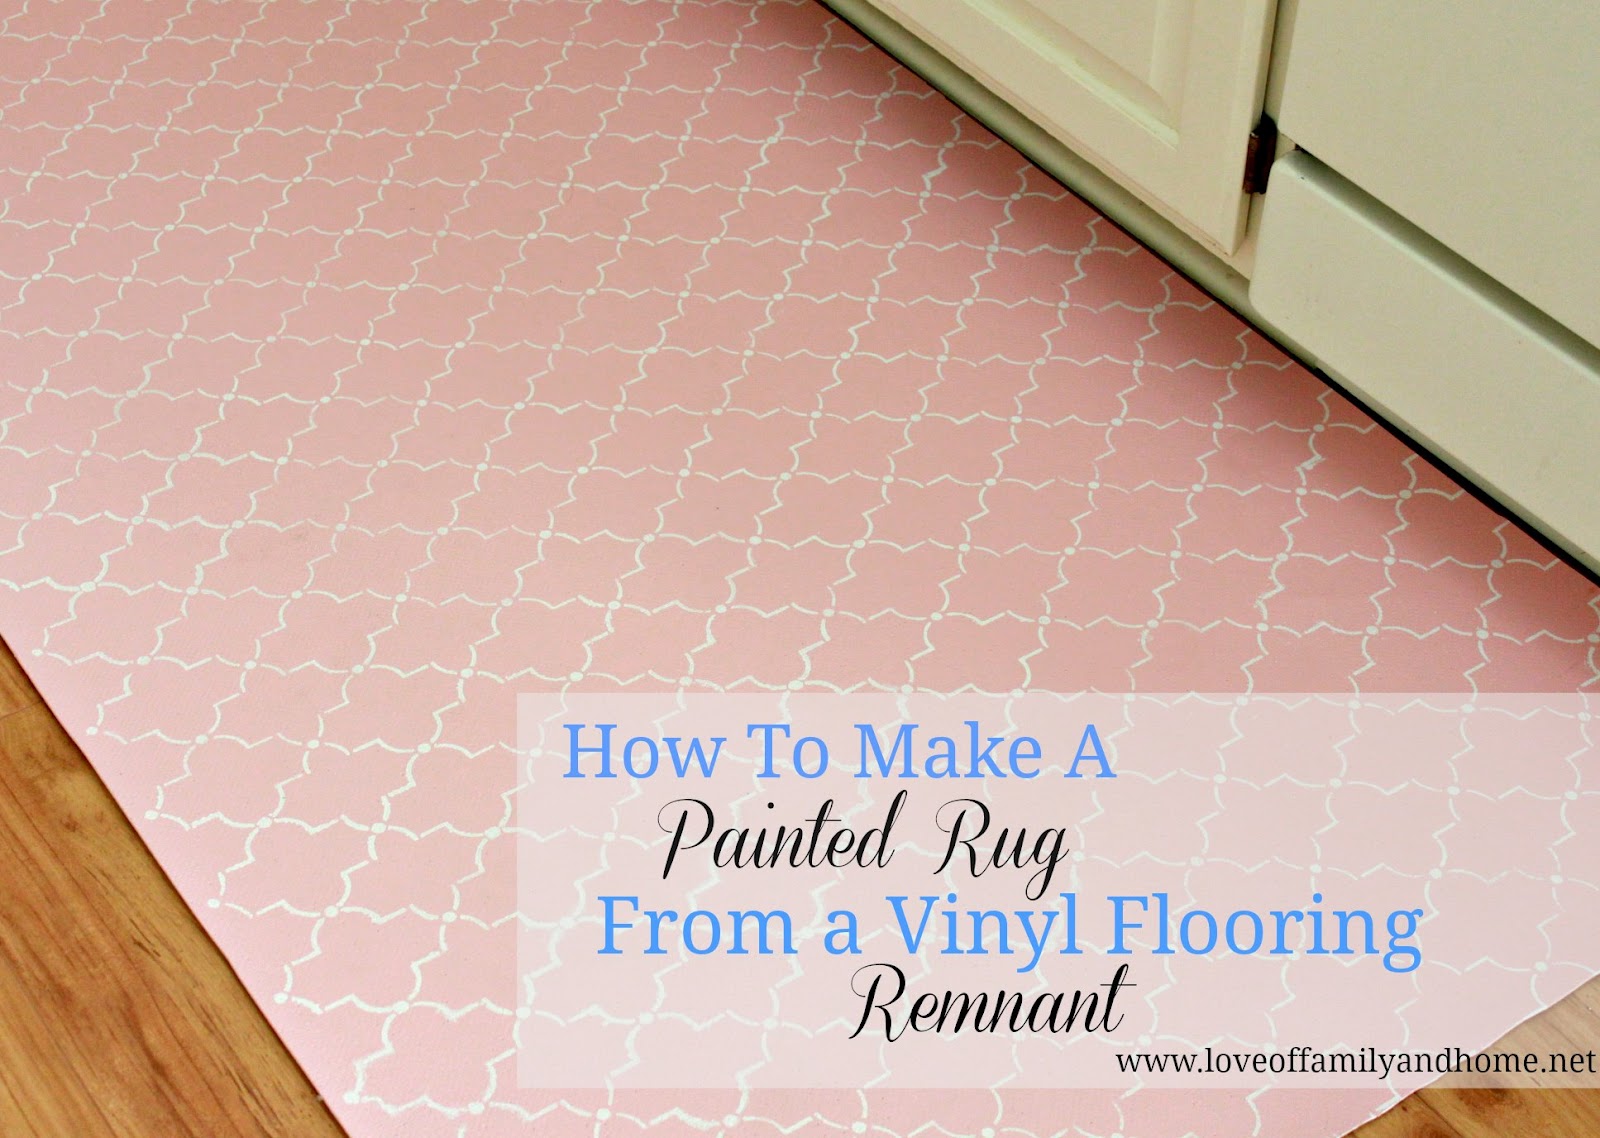 How To Paint A Rug Using Vinyl Flooring, What Kind Of Rug Can I Use On Vinyl Flooring